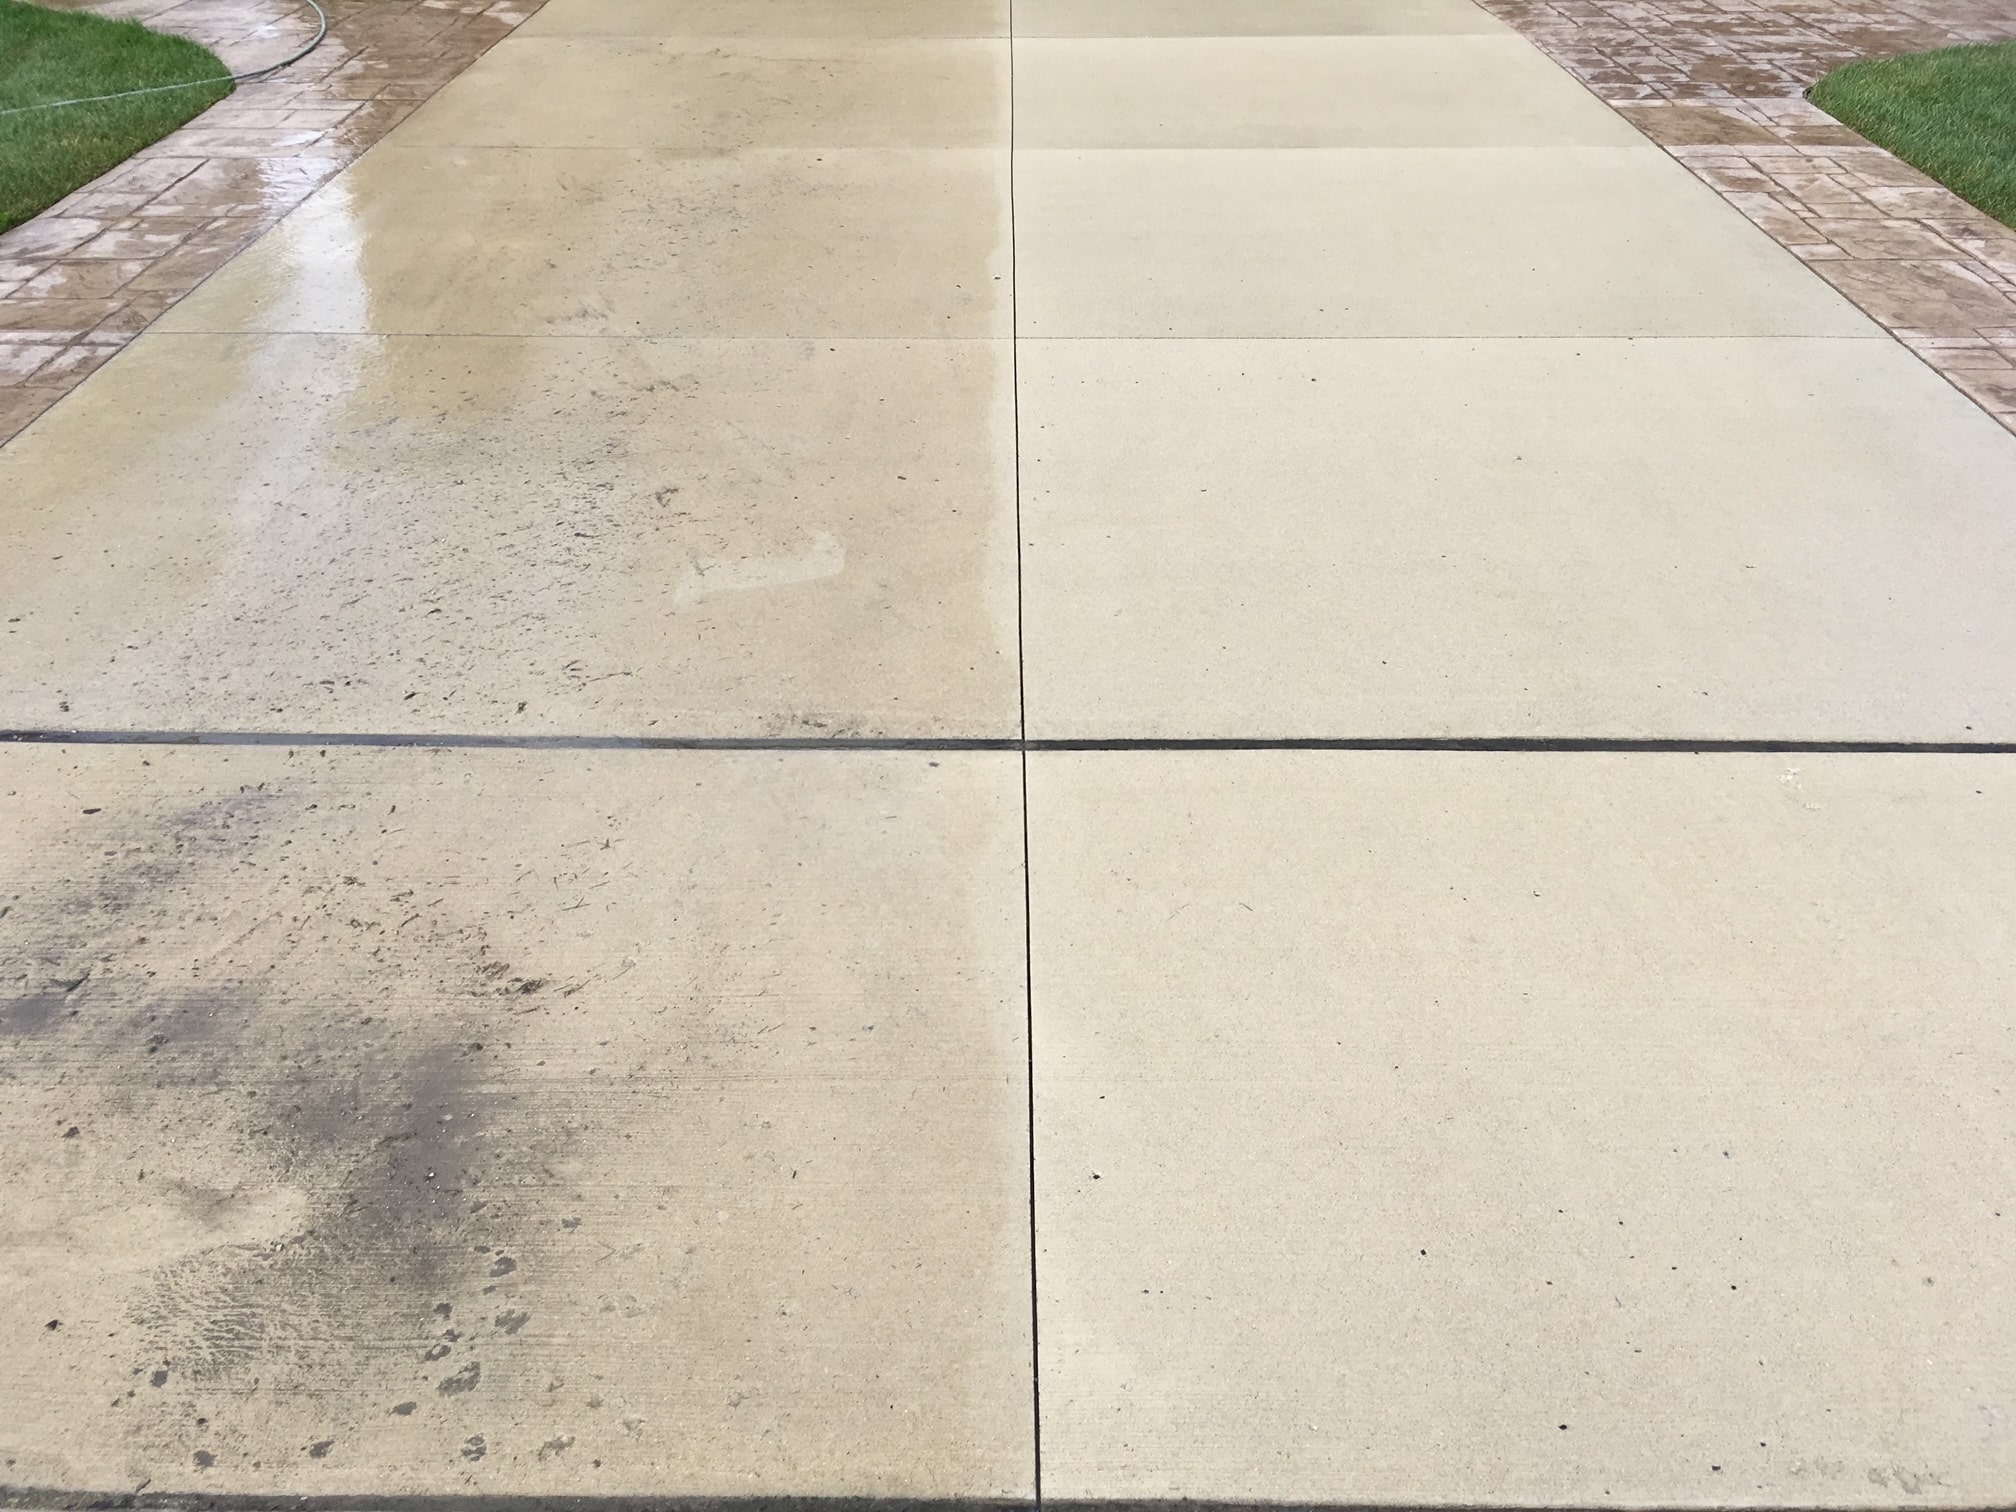 driveway cleaning in Shelby township